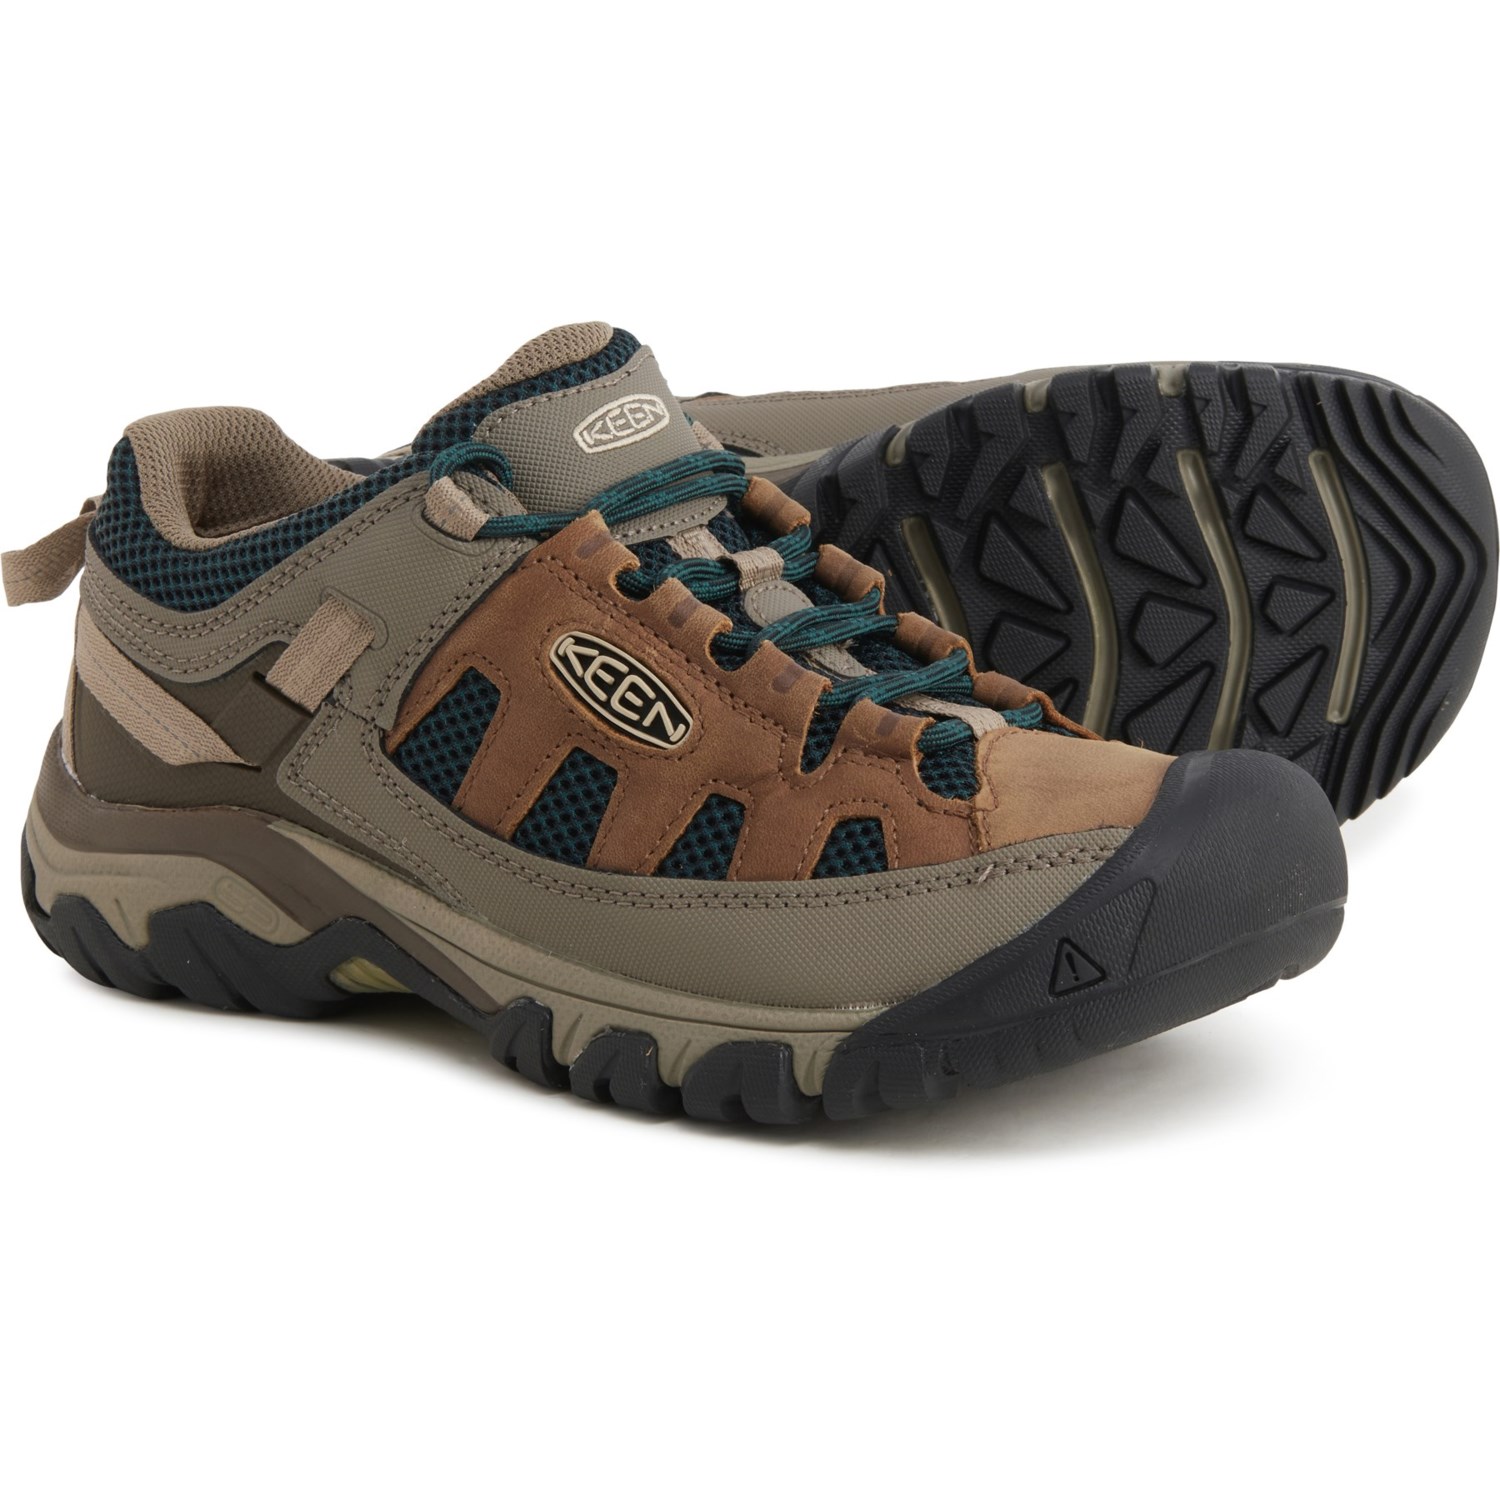 Keen Targhee Vent Hiking Shoes (For Women) - Save 47%